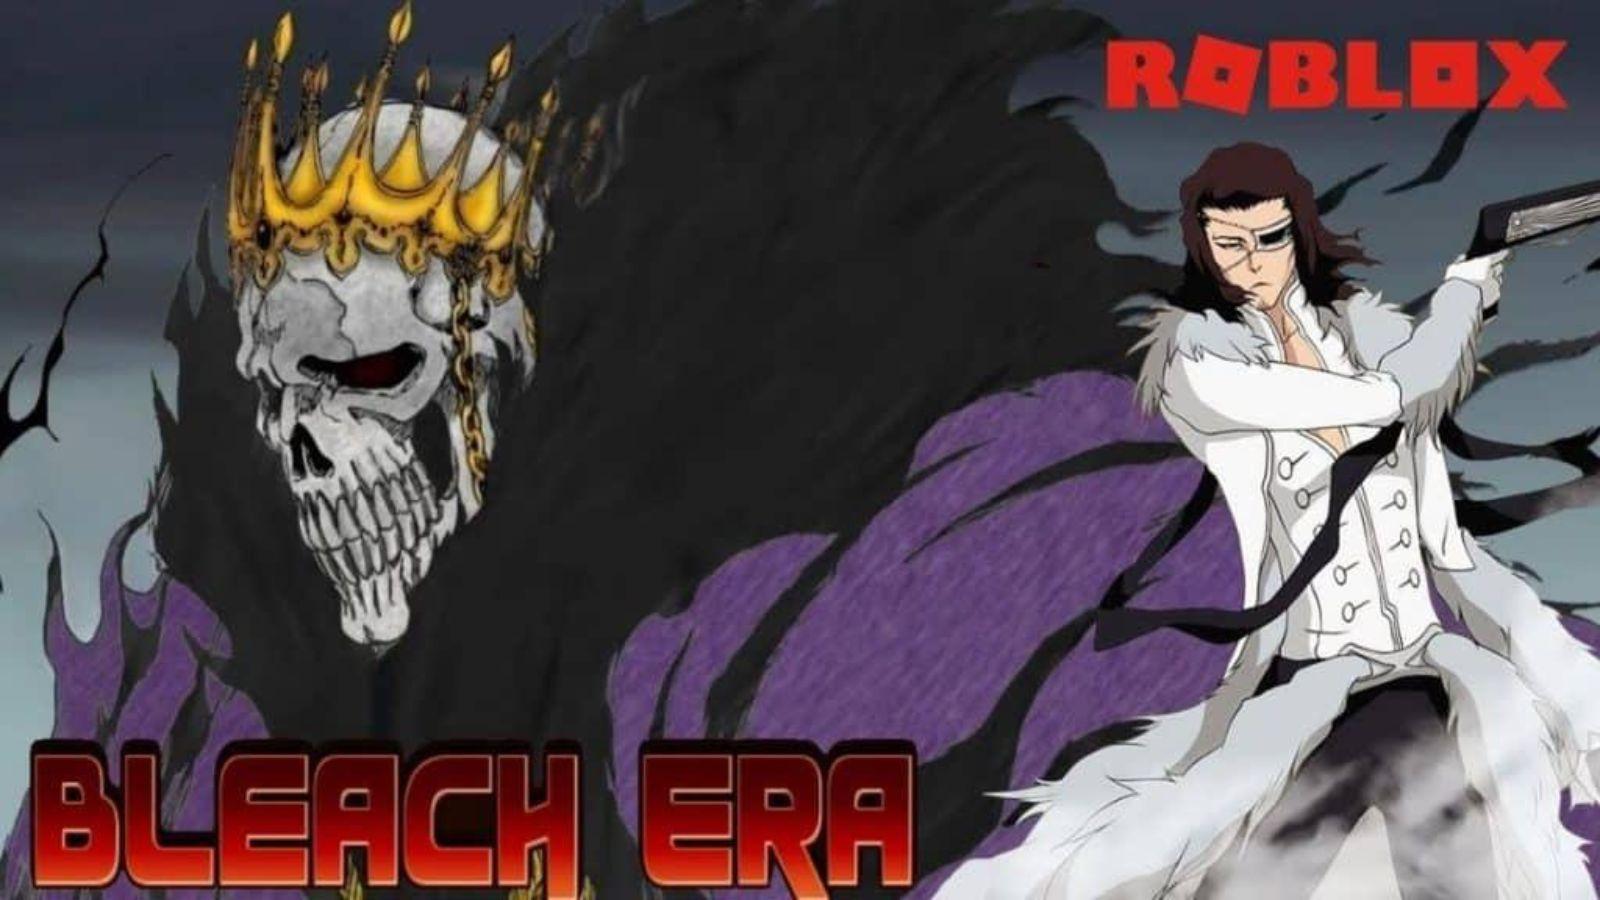 BRAND NEW Free Codes For Roblox Reaper 2 + Gameplay! The Best Bleach Game  On Roblox? 